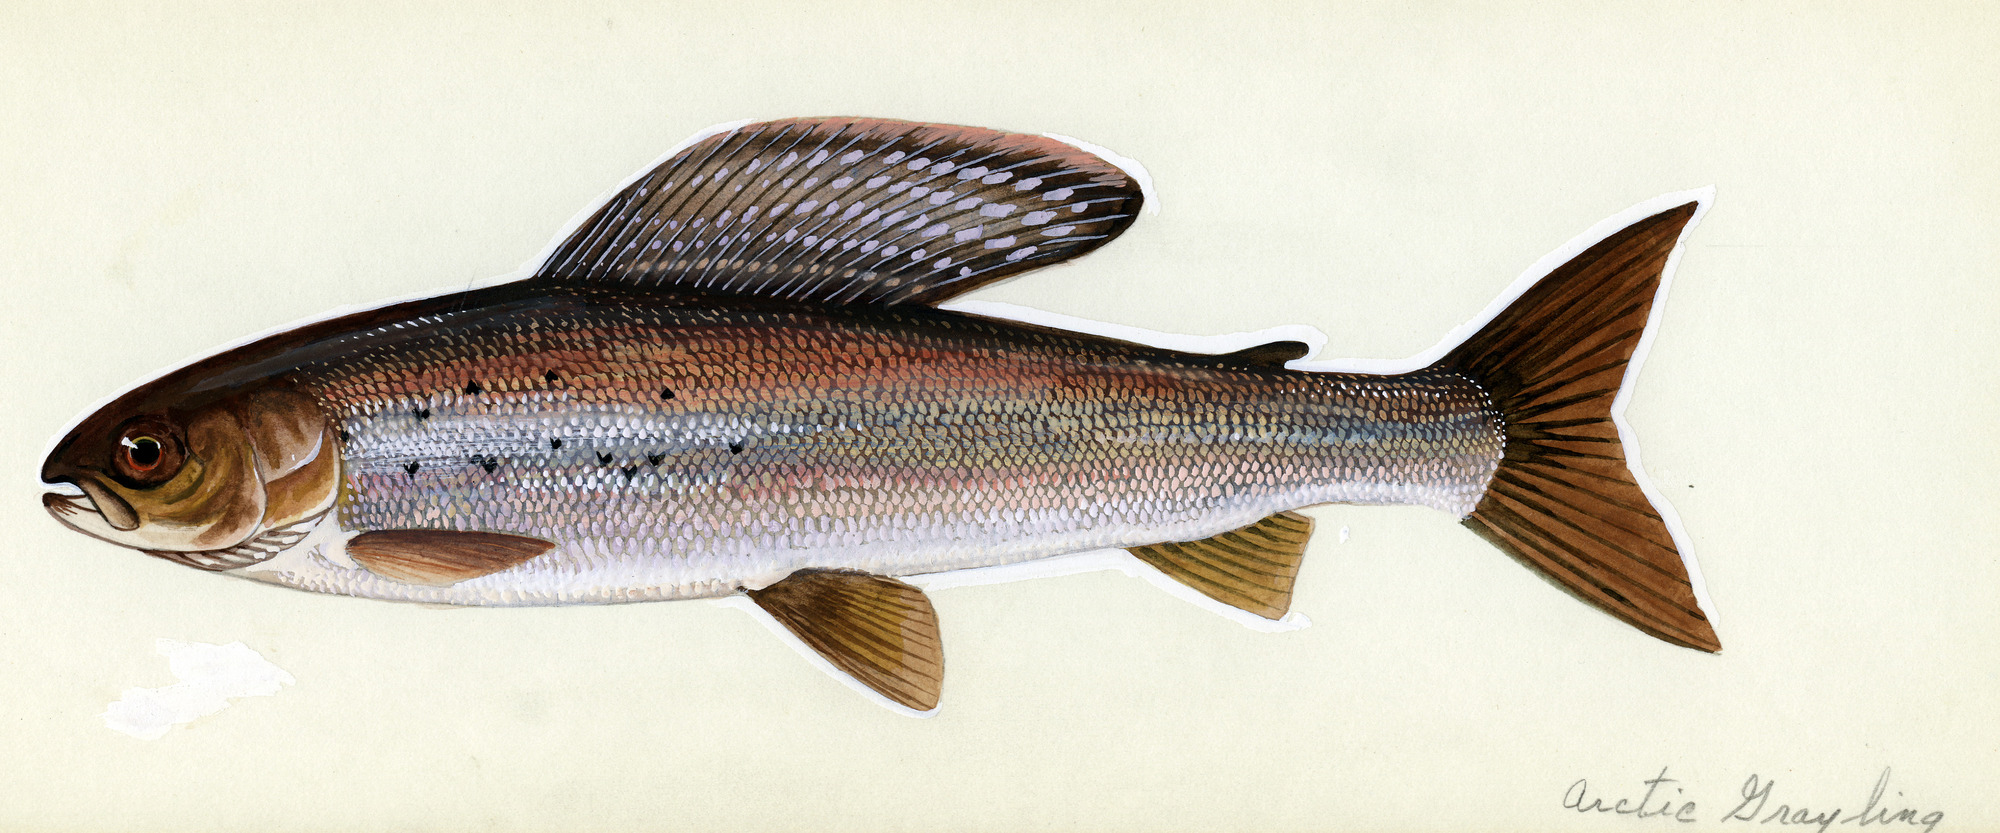 a Arctic Grayling (Thymallus arcticus) The image is proportionally correct for an average adult of the species with accurate coloration representative of a live specimen.